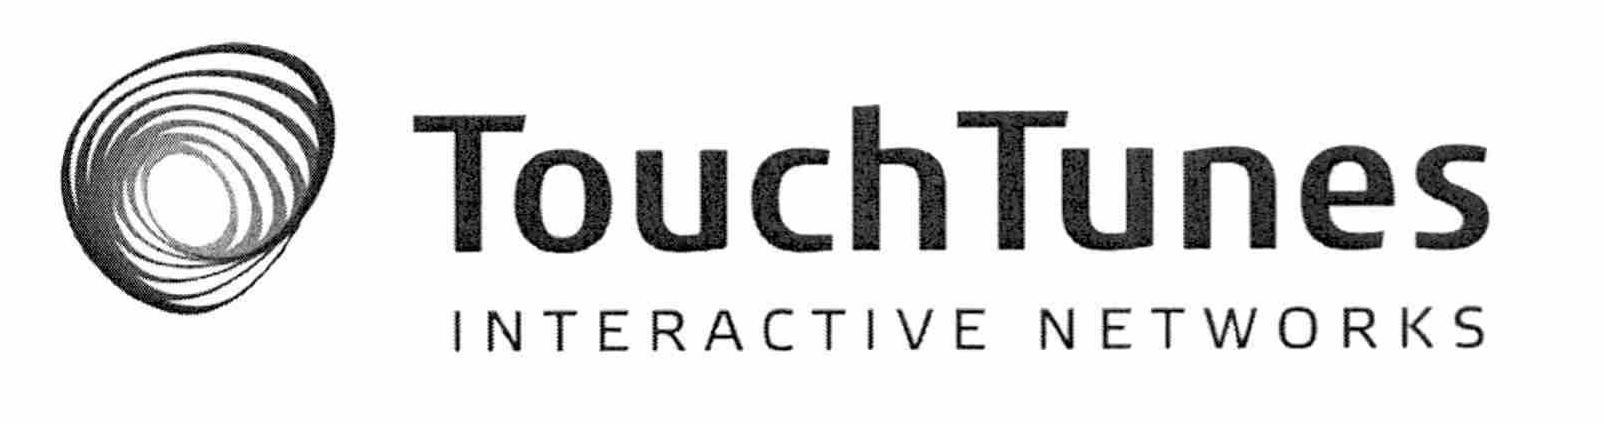  TOUCHTUNES INTERACTIVE NETWORKS